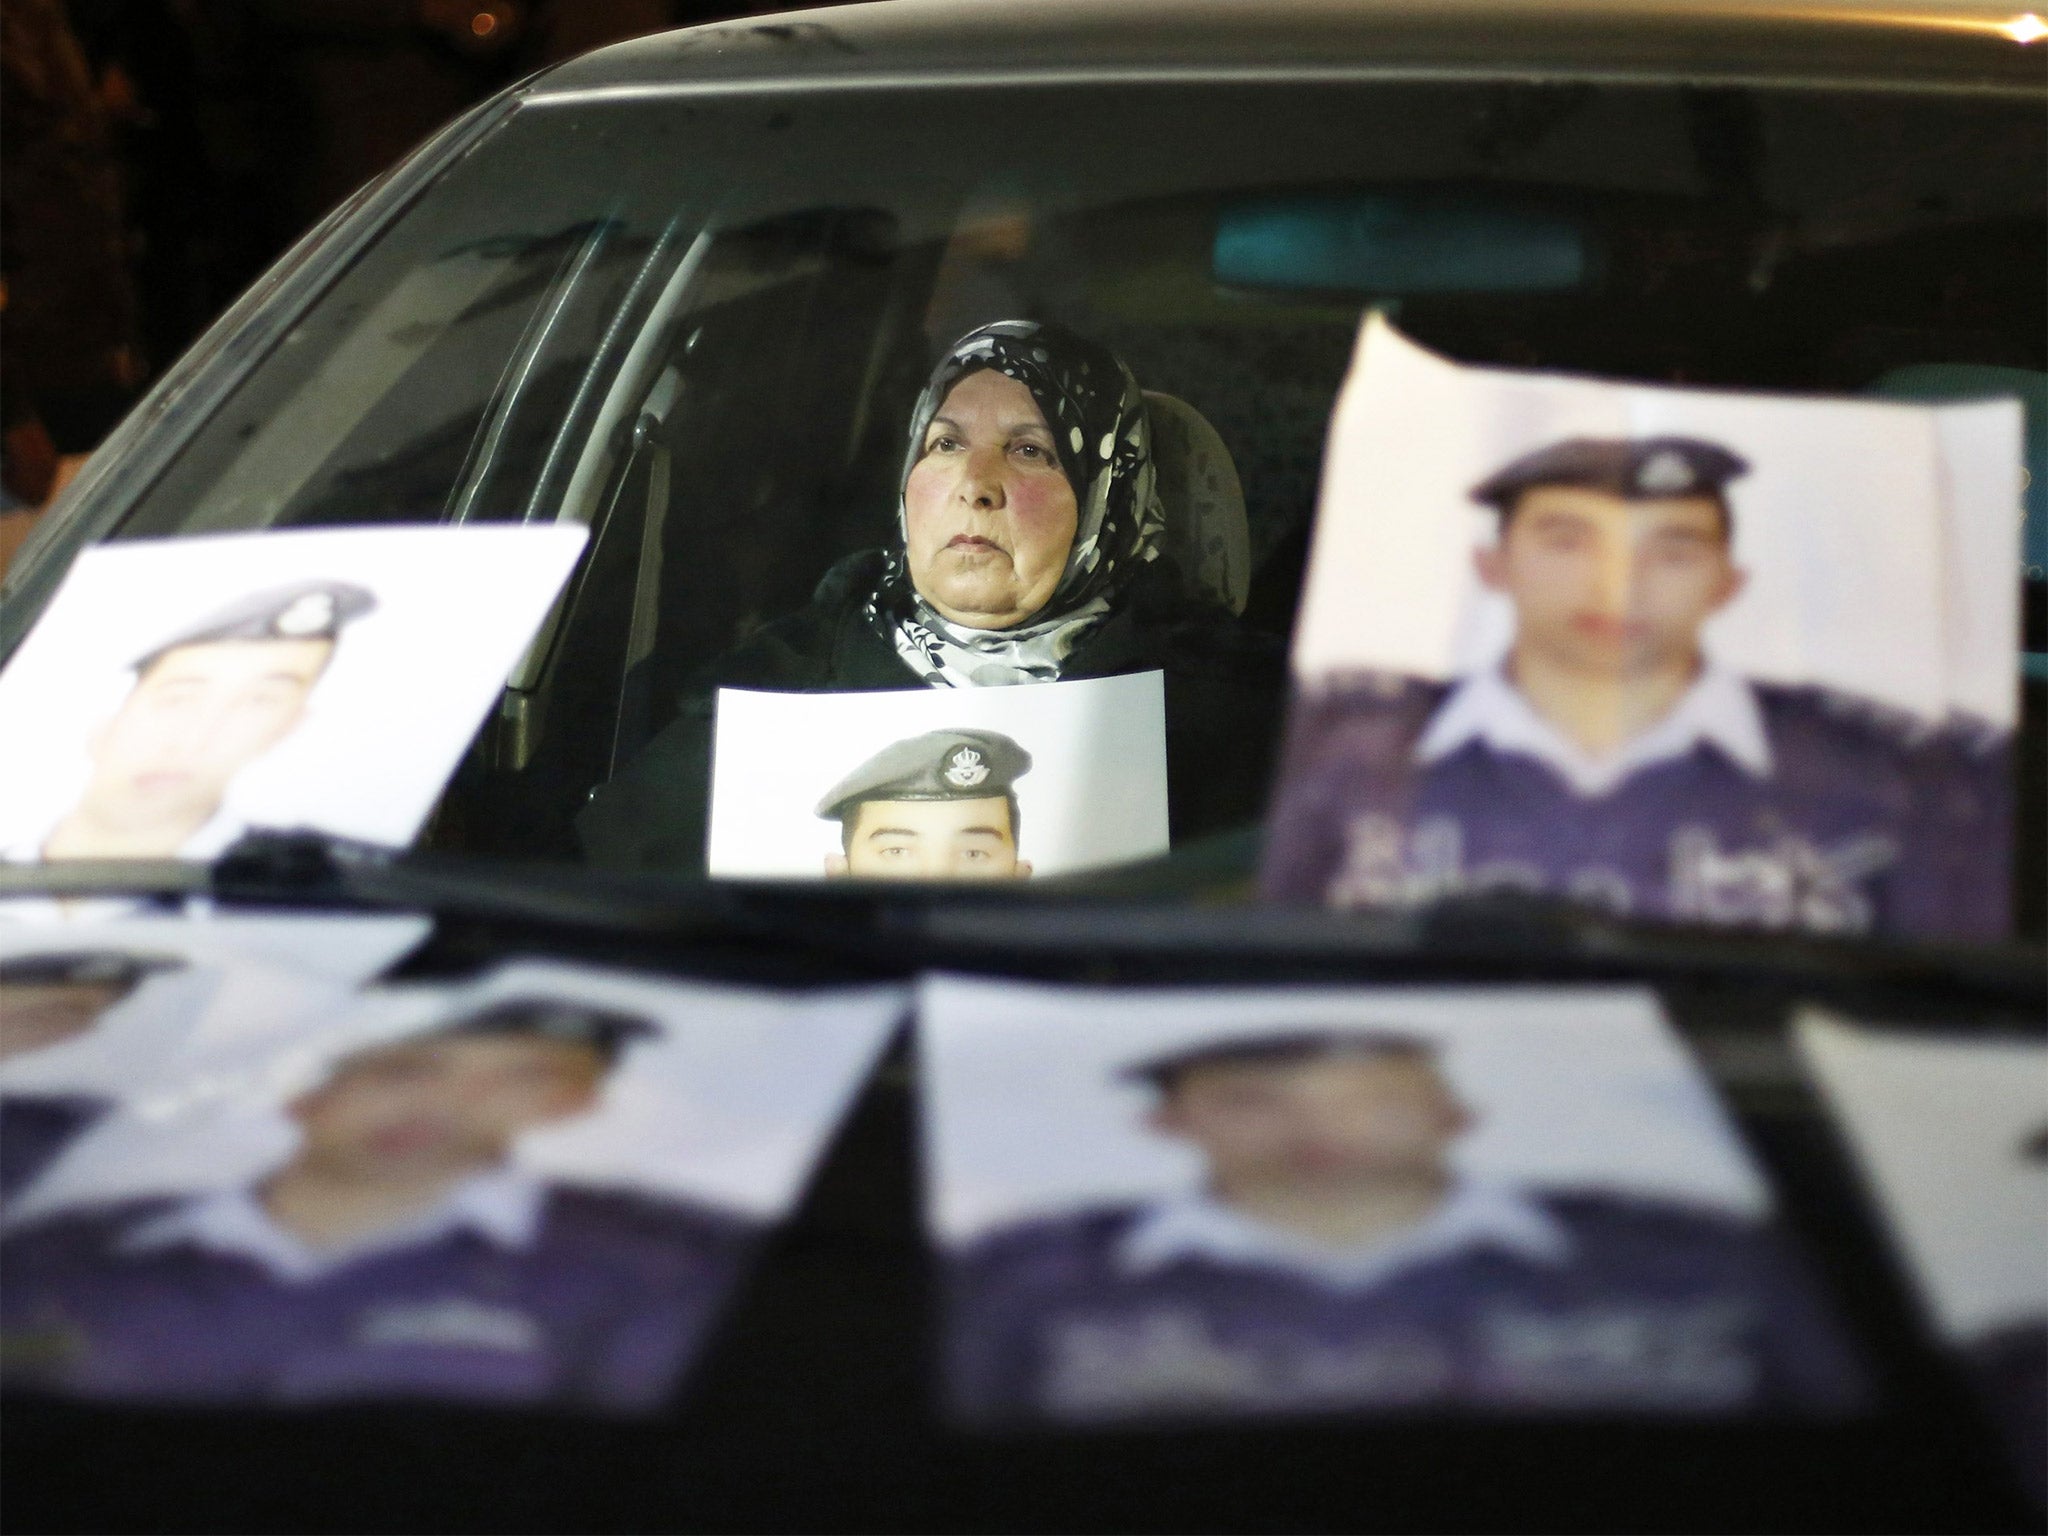 The mother of Jordanian pilot Muath al-Kasaesbeh at a demonstration in Amman, when the Jordanian government was urged to negotiate with Isis for the release of her son